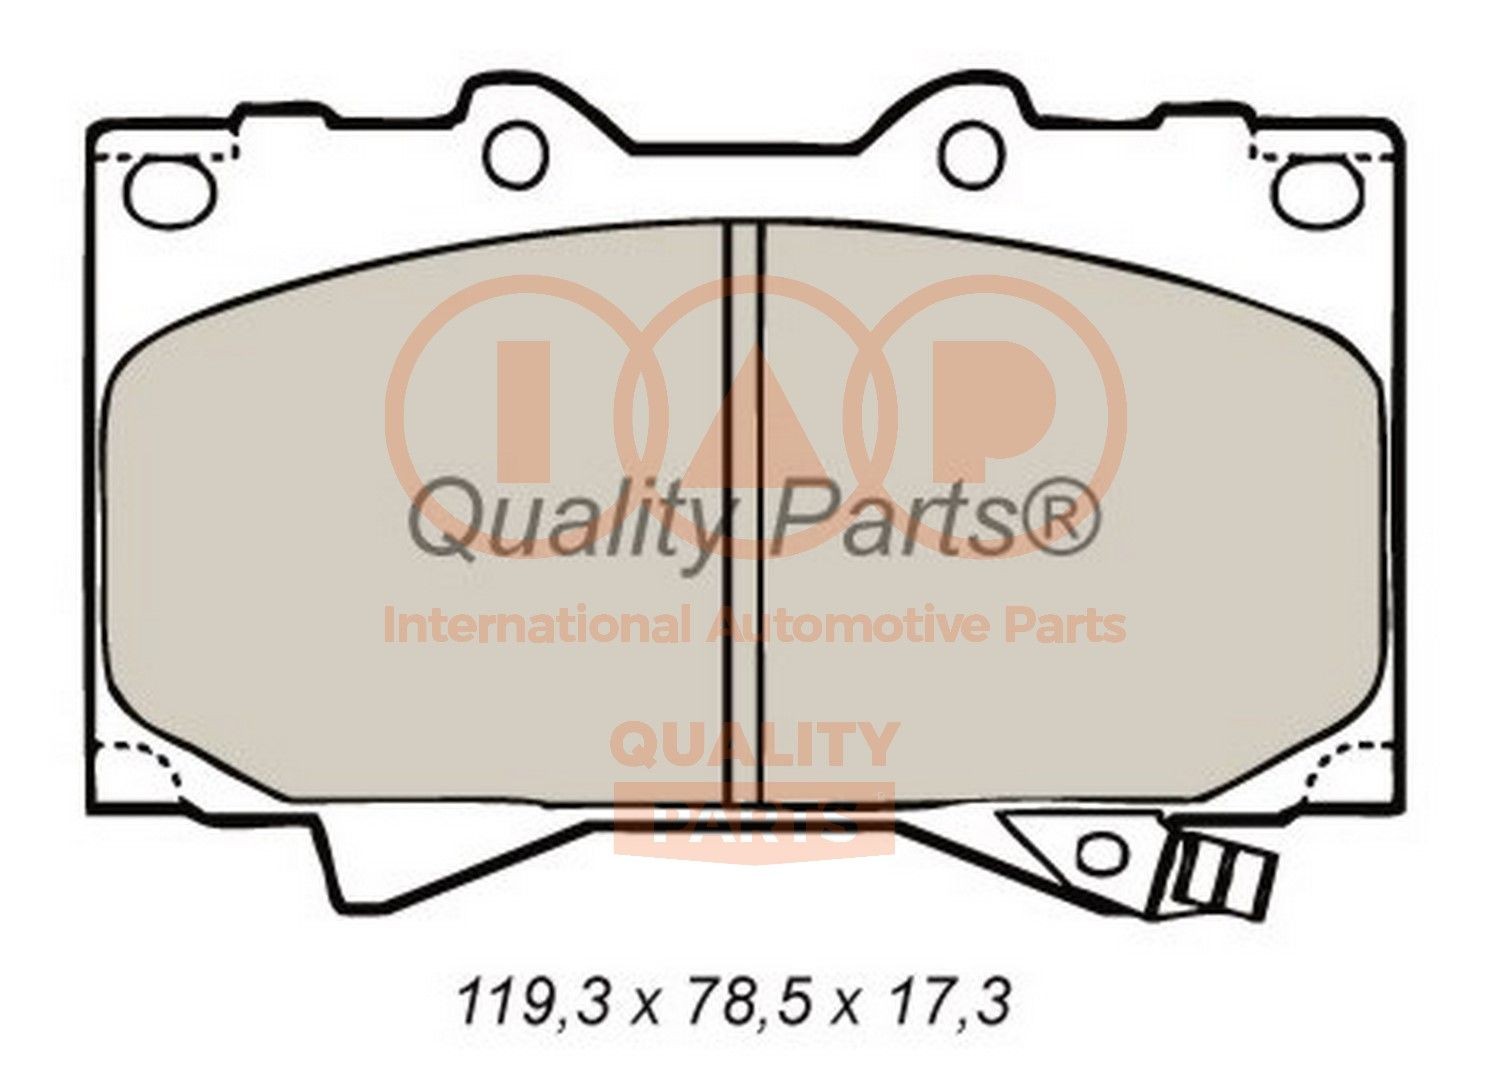 IAP QUALITY PARTS Front Axle Height 1: 78,5mm, Width 1: 119,3mm, Thickness 1: 17,3mm Brake pads 704-17052P buy